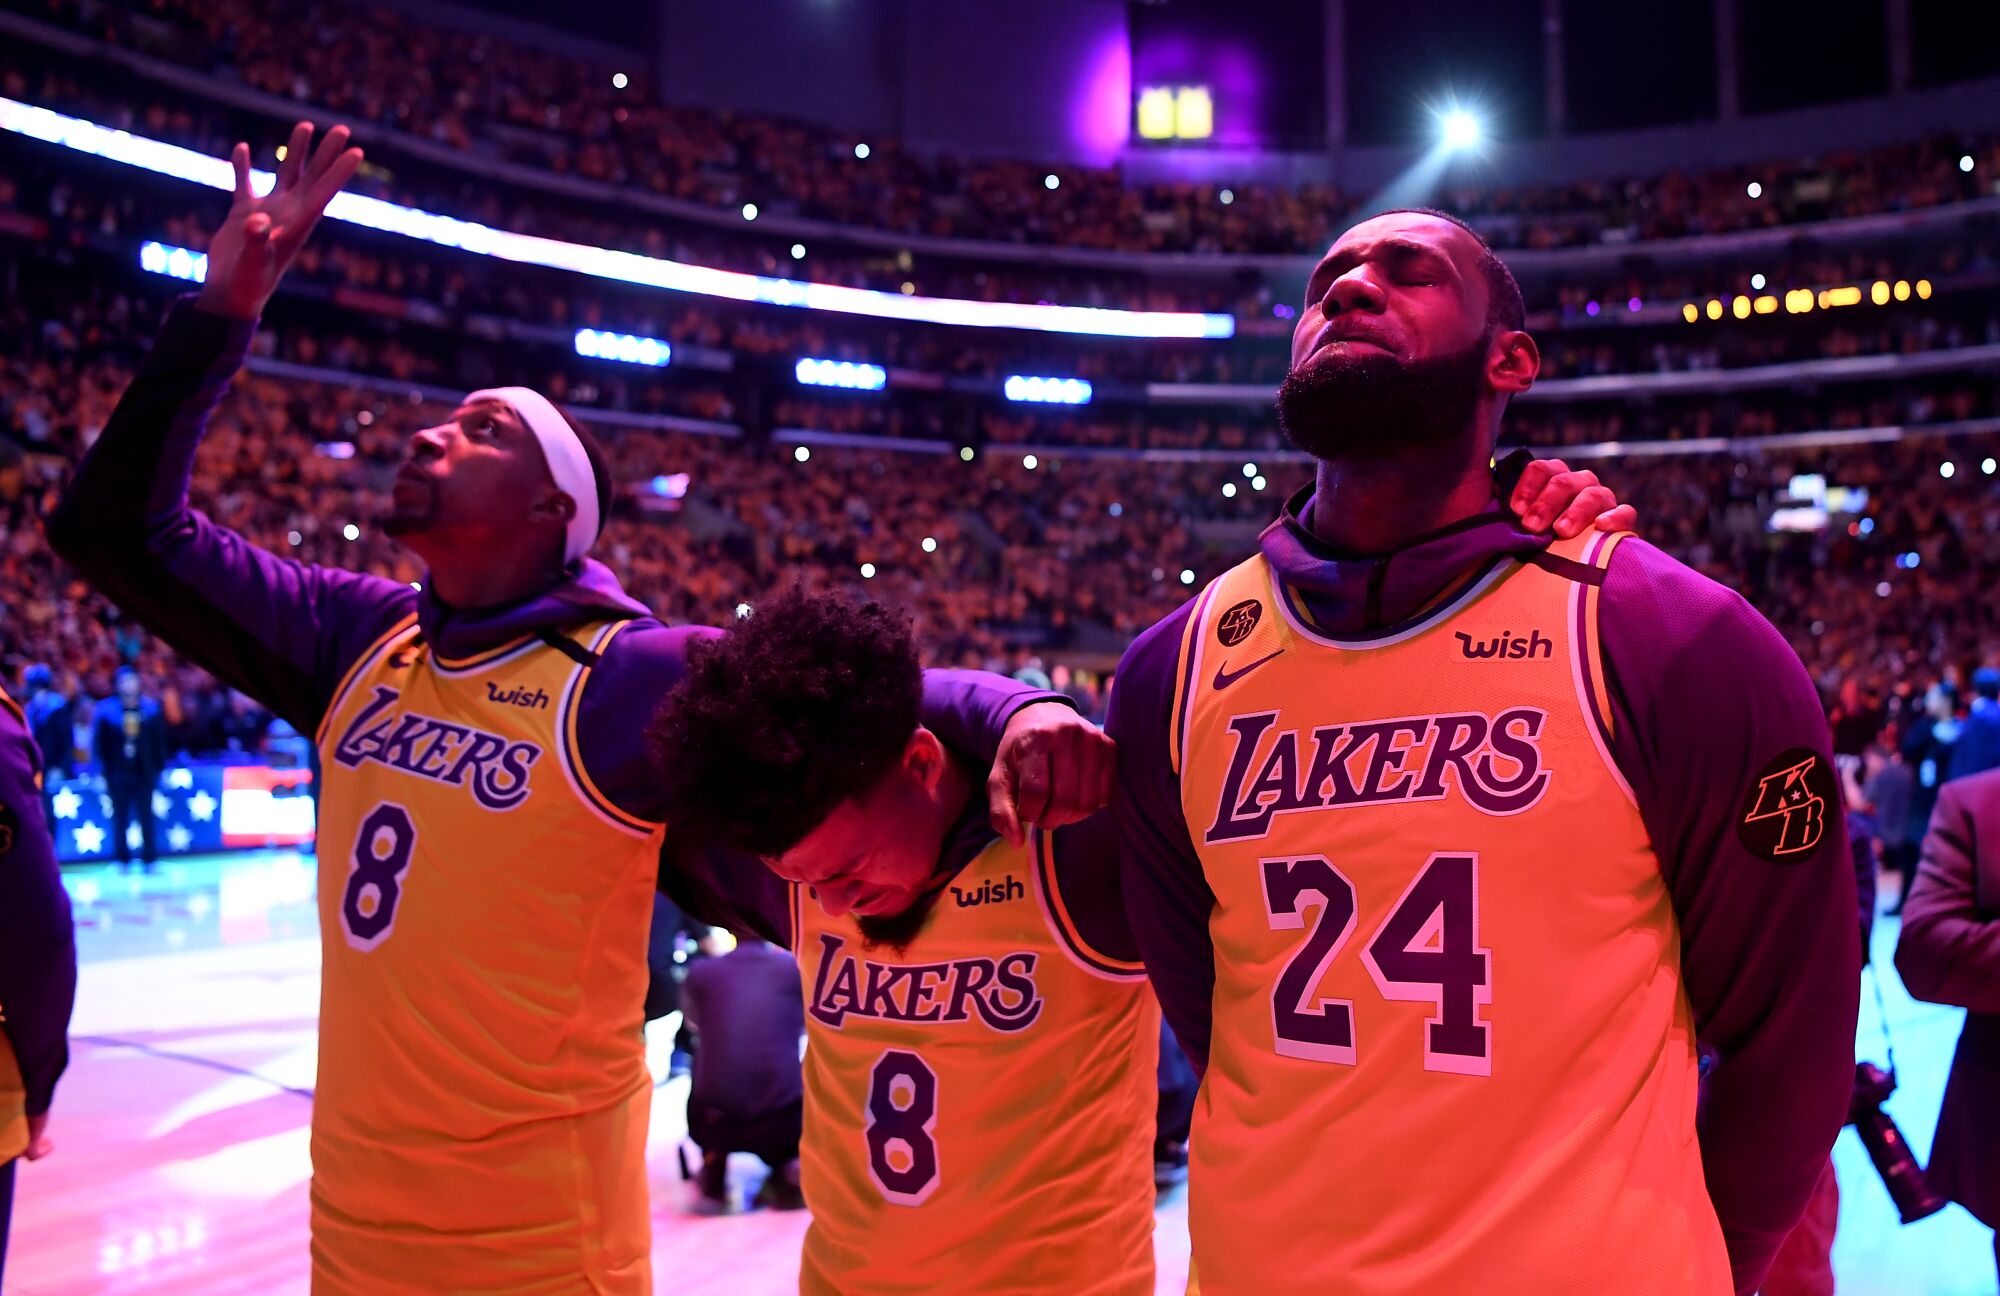 Lakers players, eyes closed or looking to the sky, wear jerseys with Kobe's numbers on the court in Staples Center.